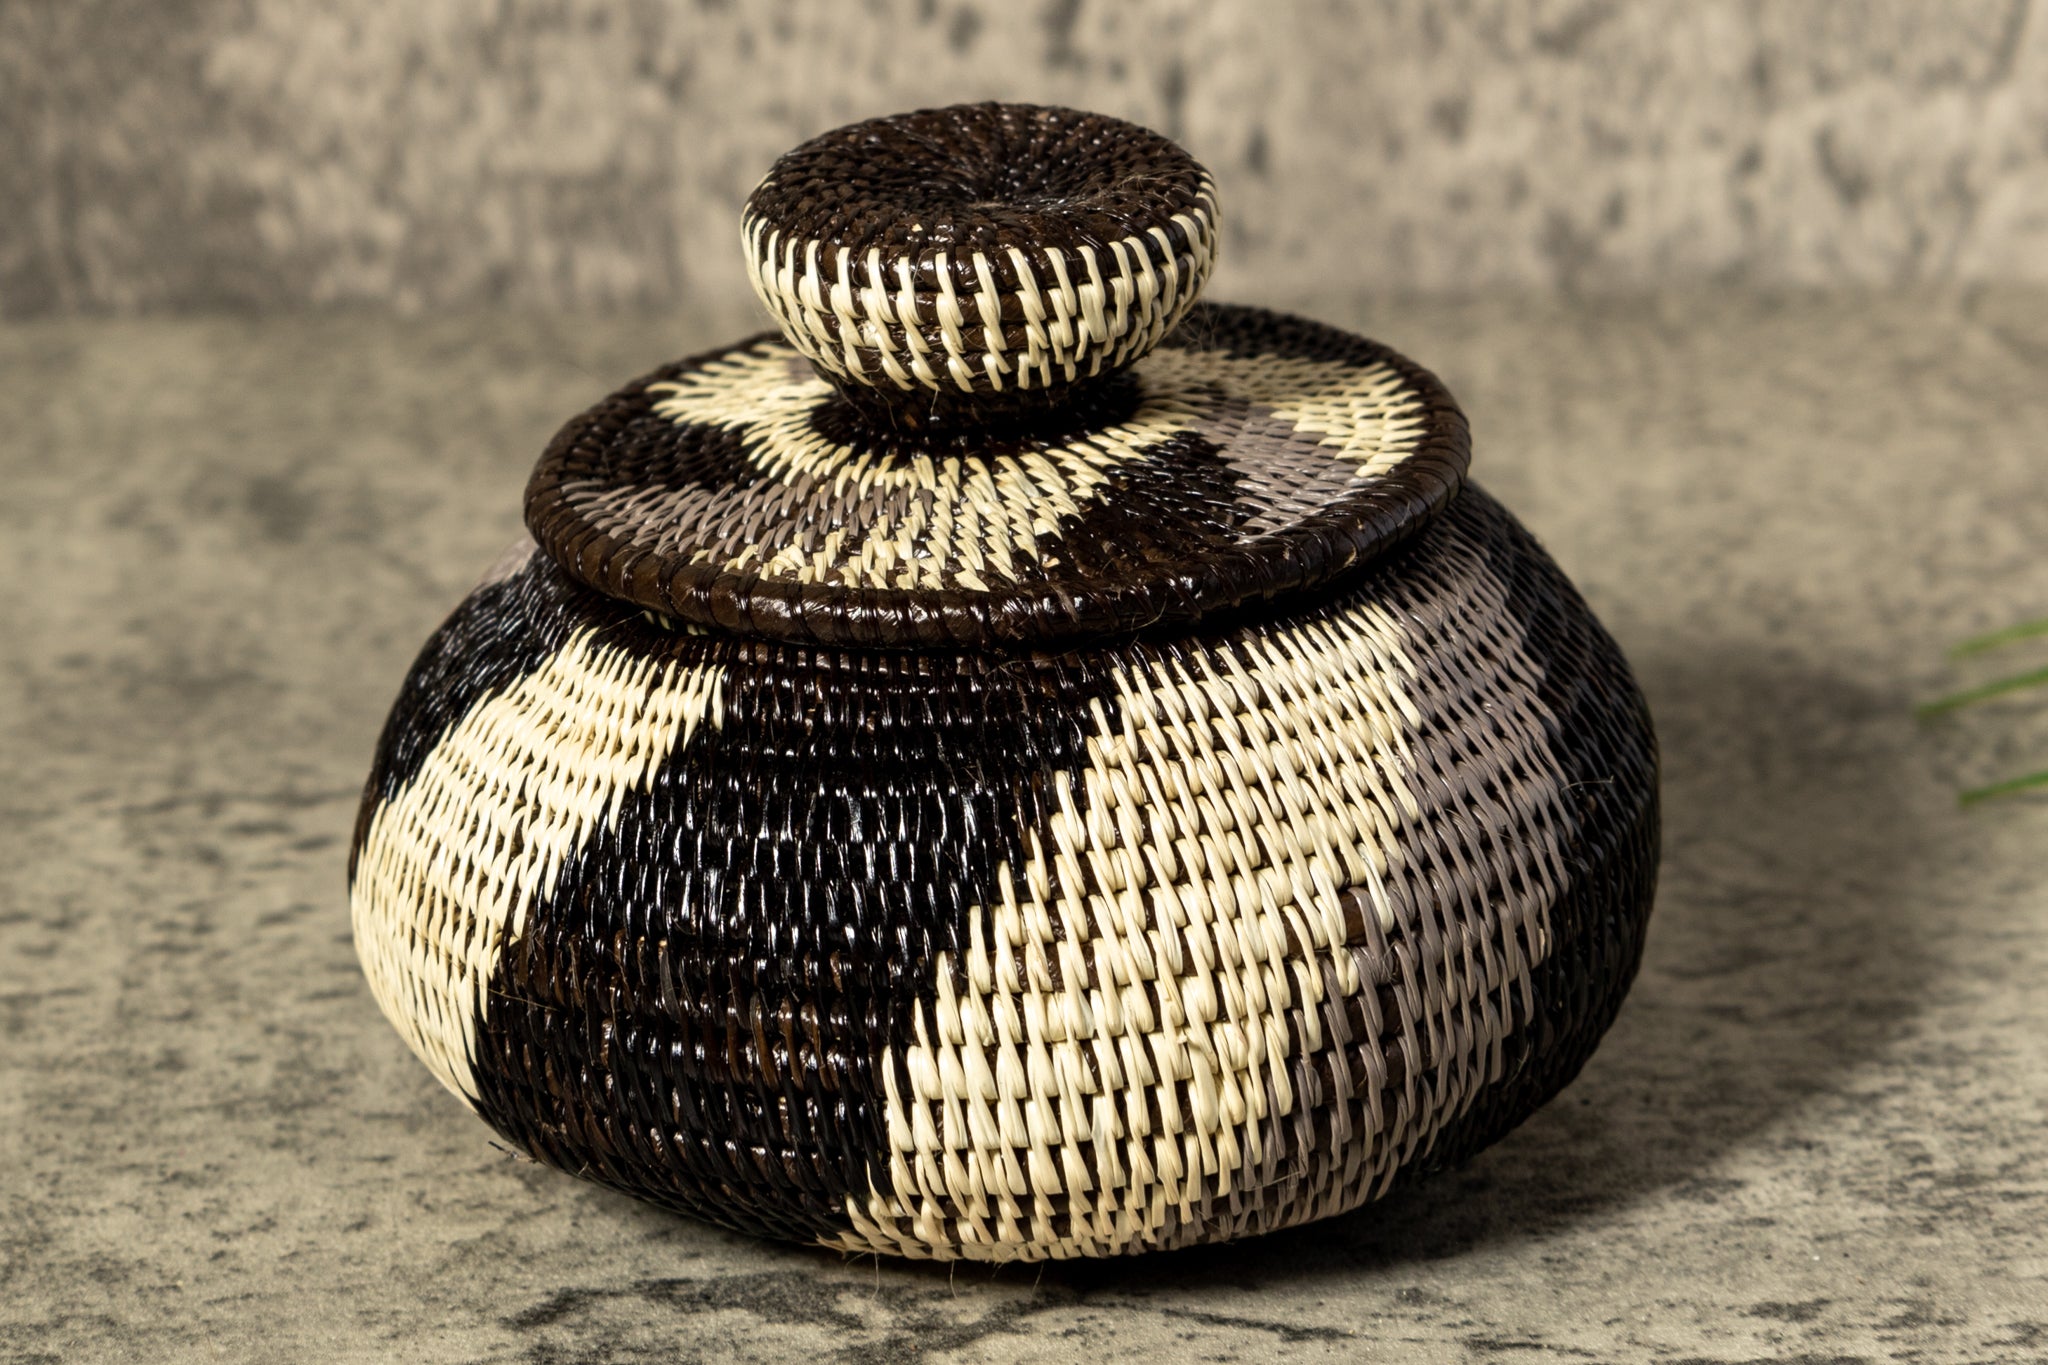 Black White And Gray Woven Basket With Top